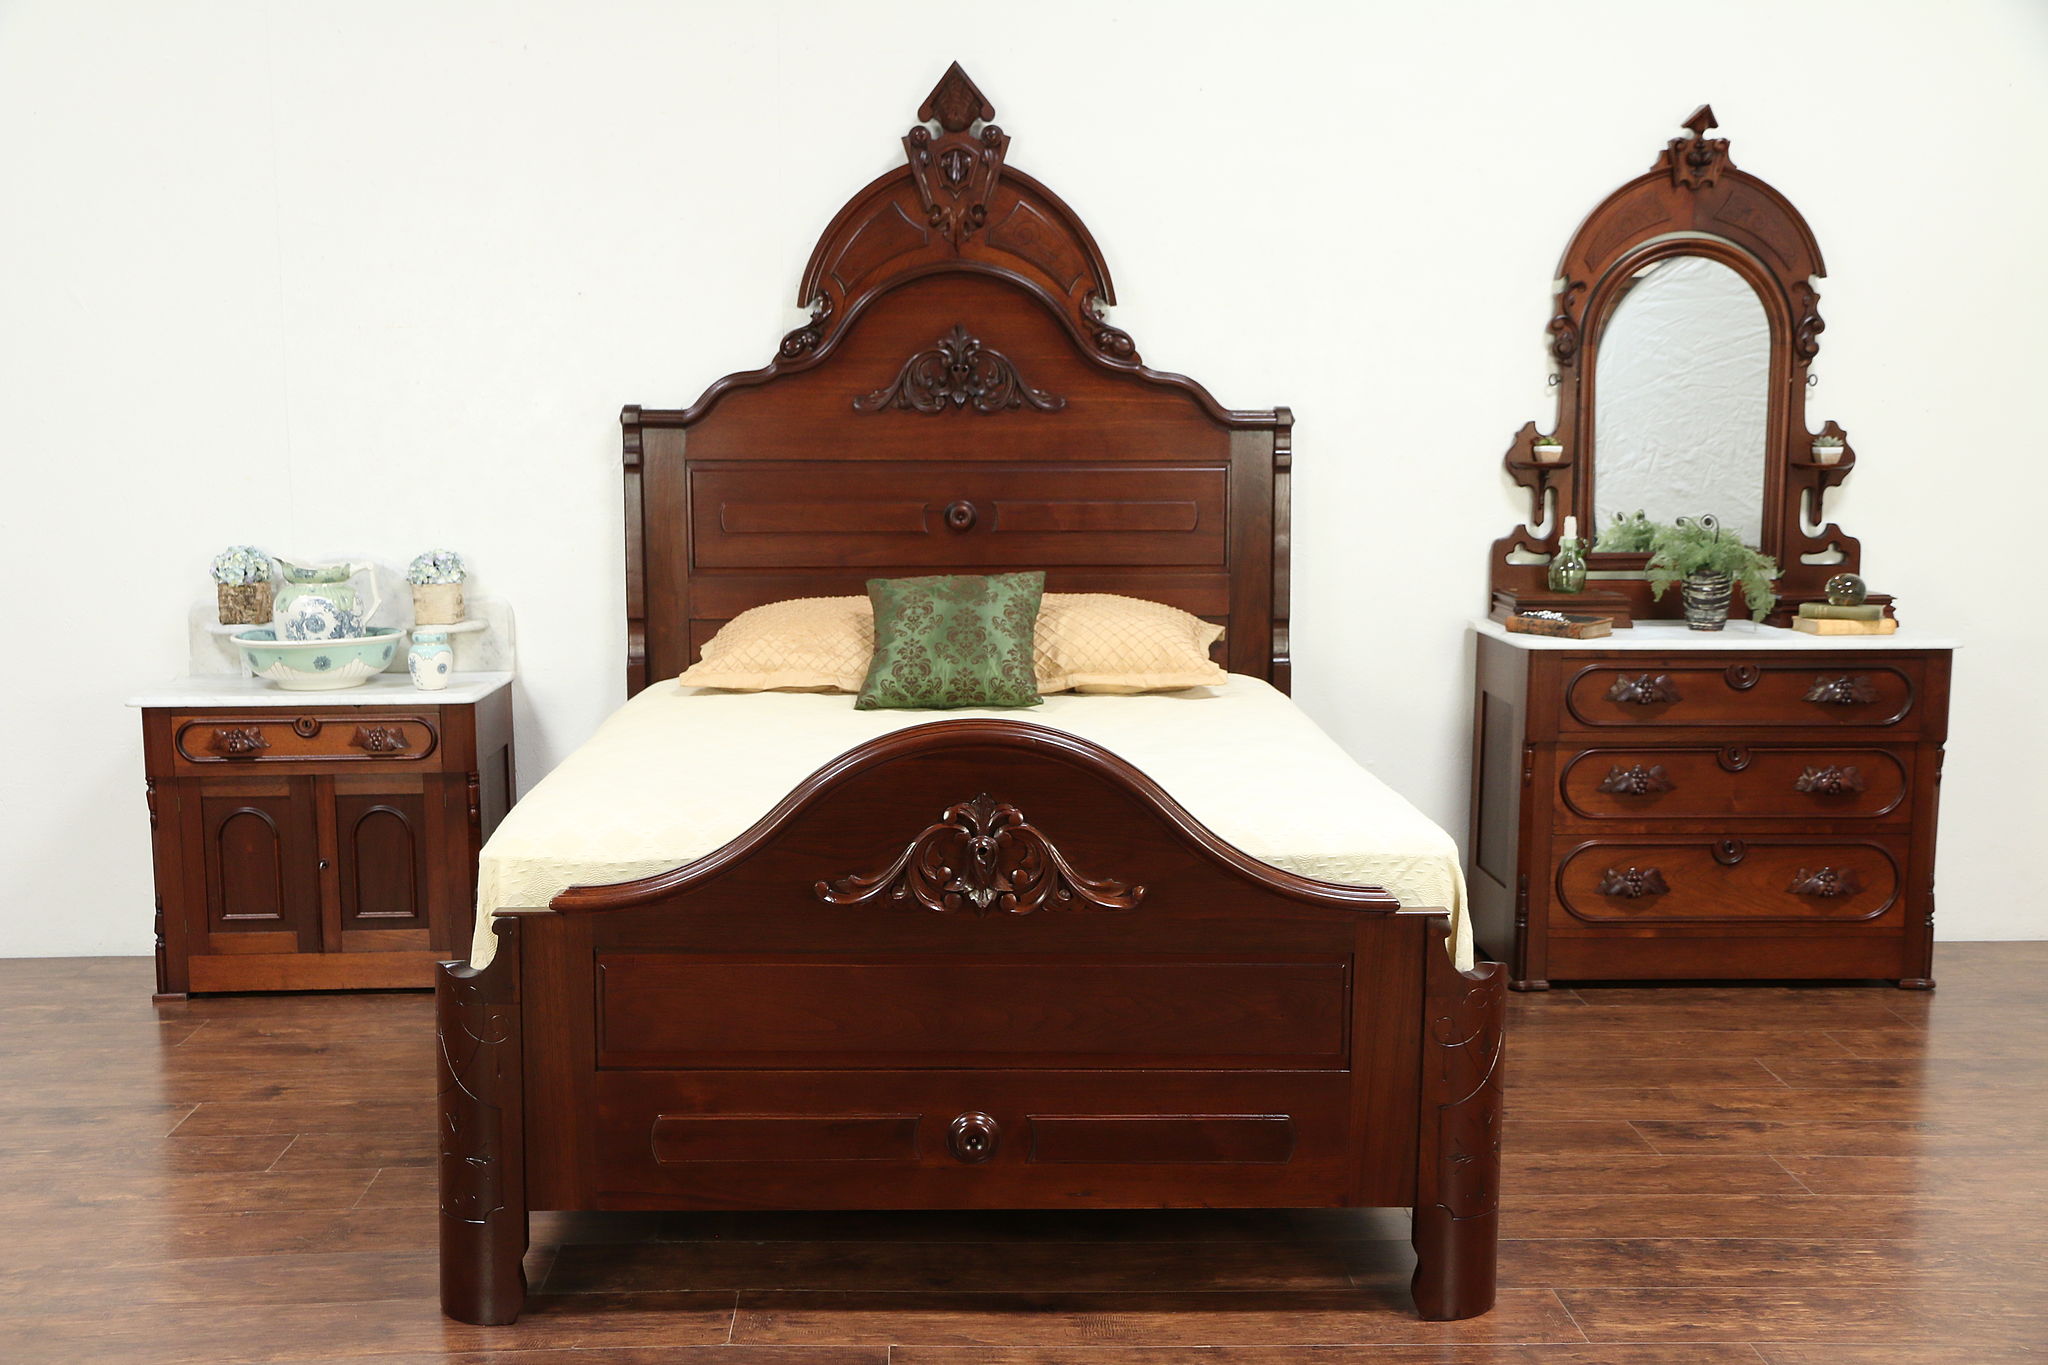 antique bedroom furniture with oval cameo decor